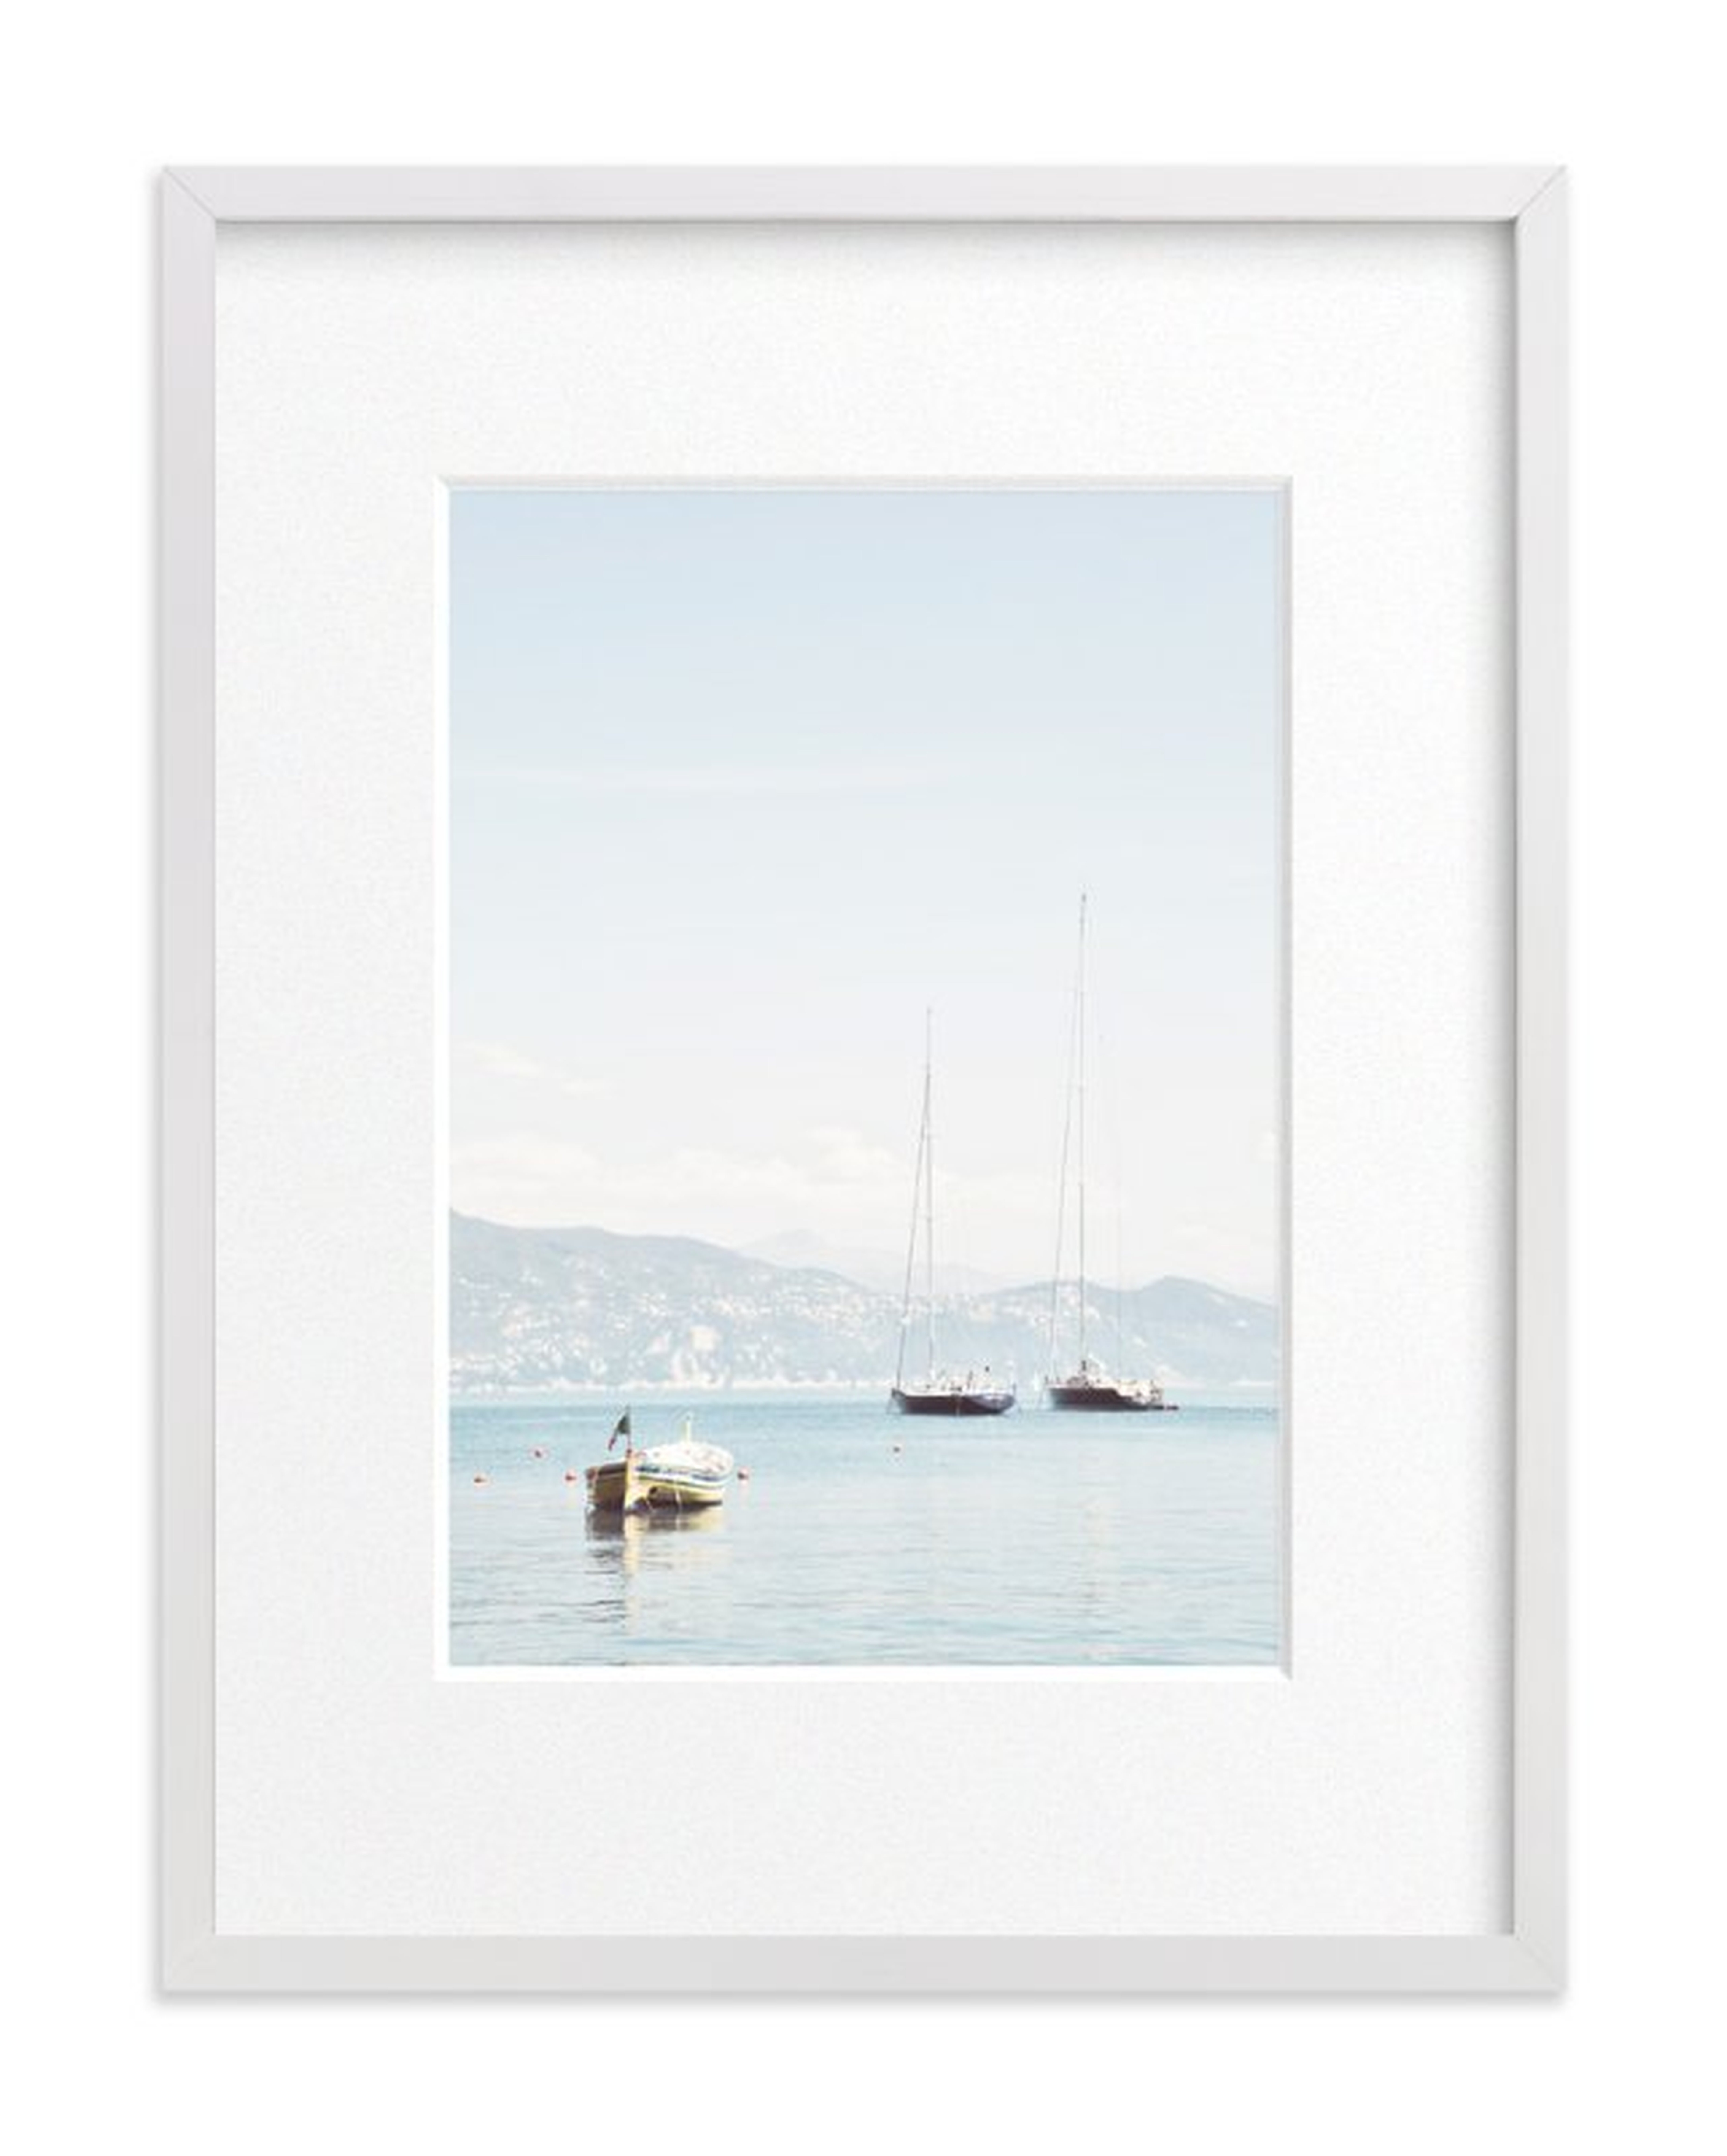 Portofino afternoon - 18x24 - White Wood Frame - Matted - Minted